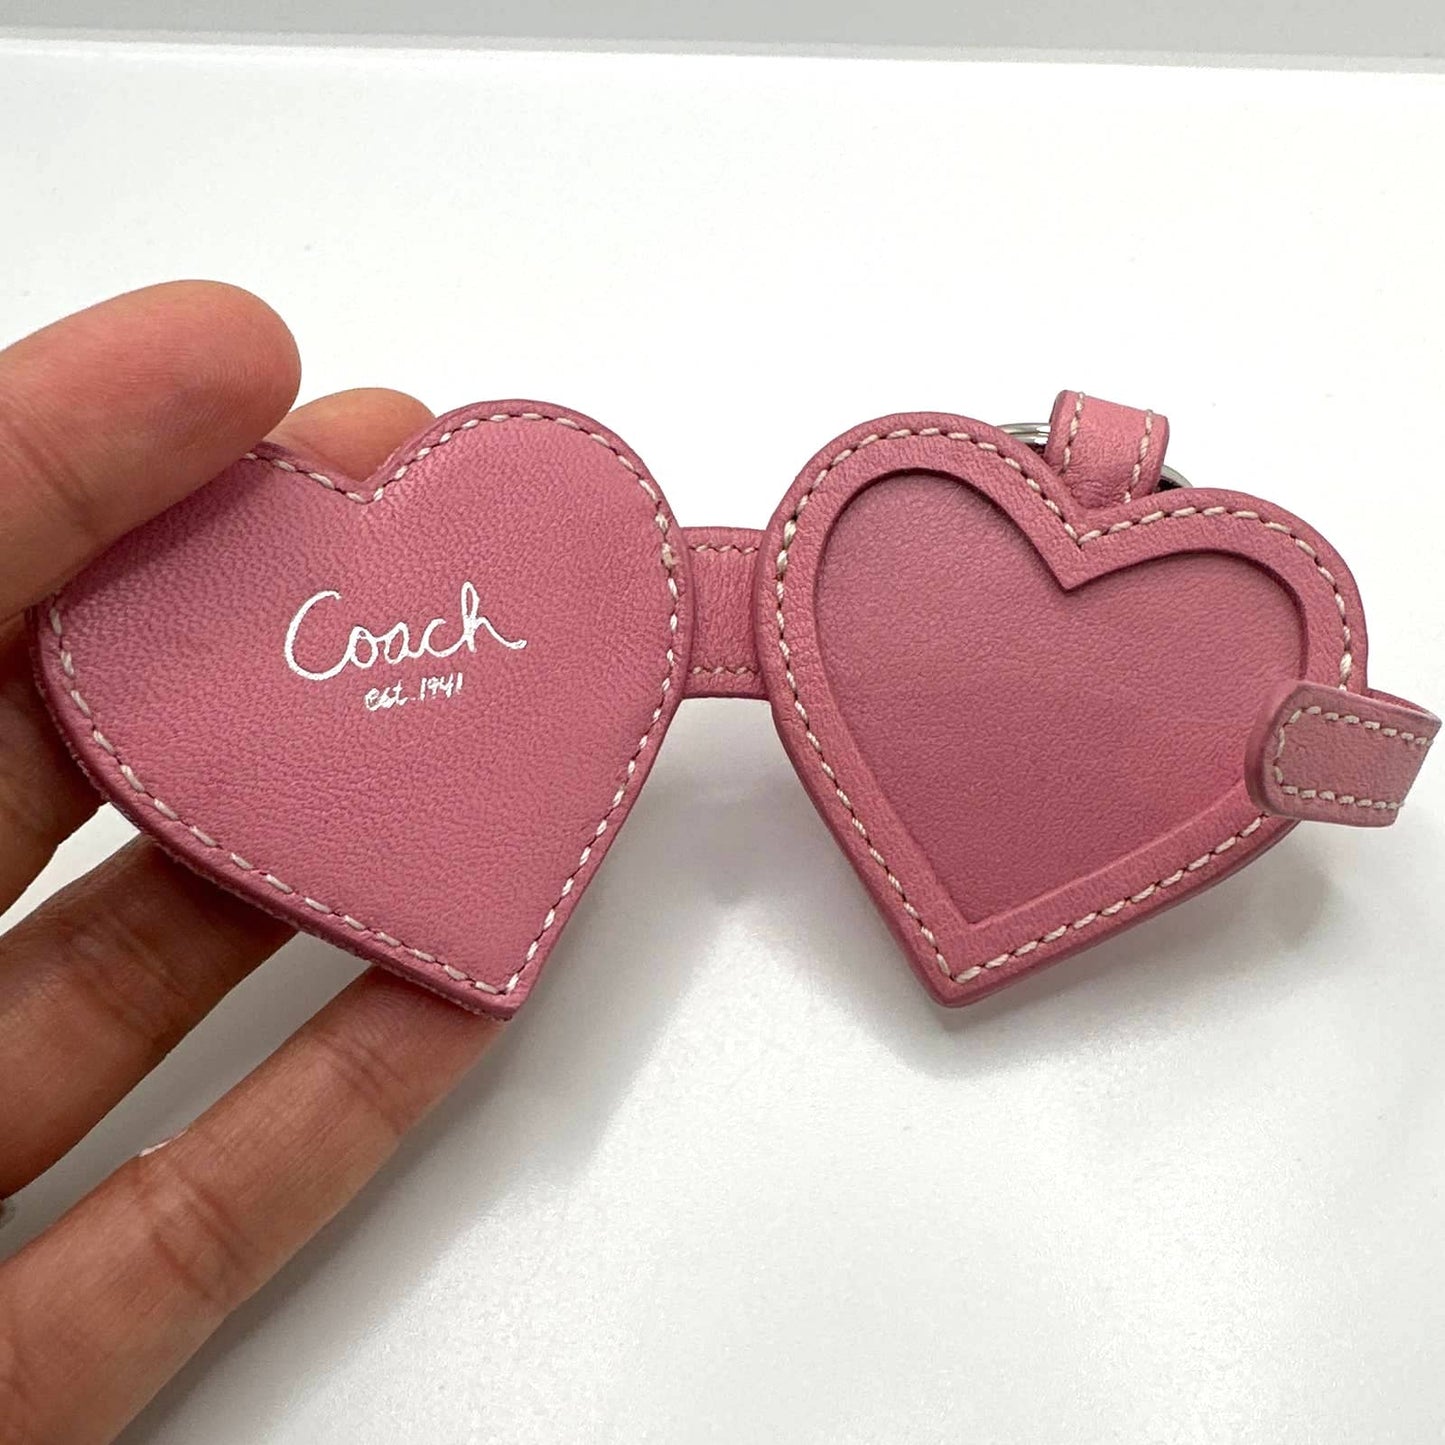 COACH Pink Signature Canvas Heart Bag Charm with Photo Slot